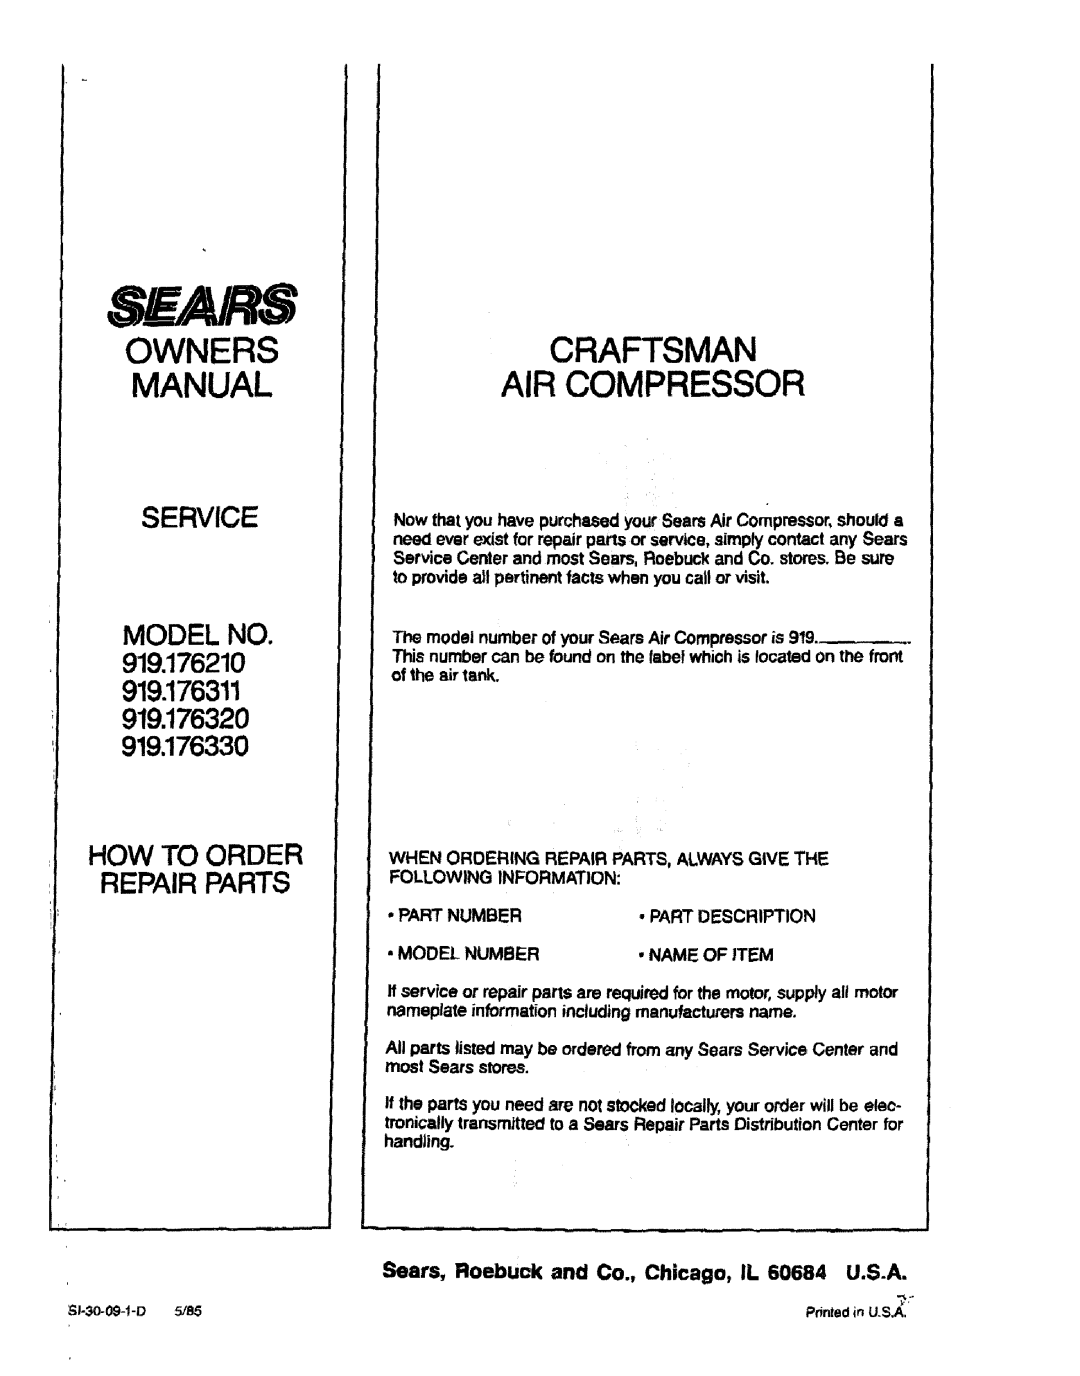 Sears 919.17633, 919.17632, 919.17621, 311 owner manual Owners, Craftsman, Manual, Air Compressor, Sears, Service 